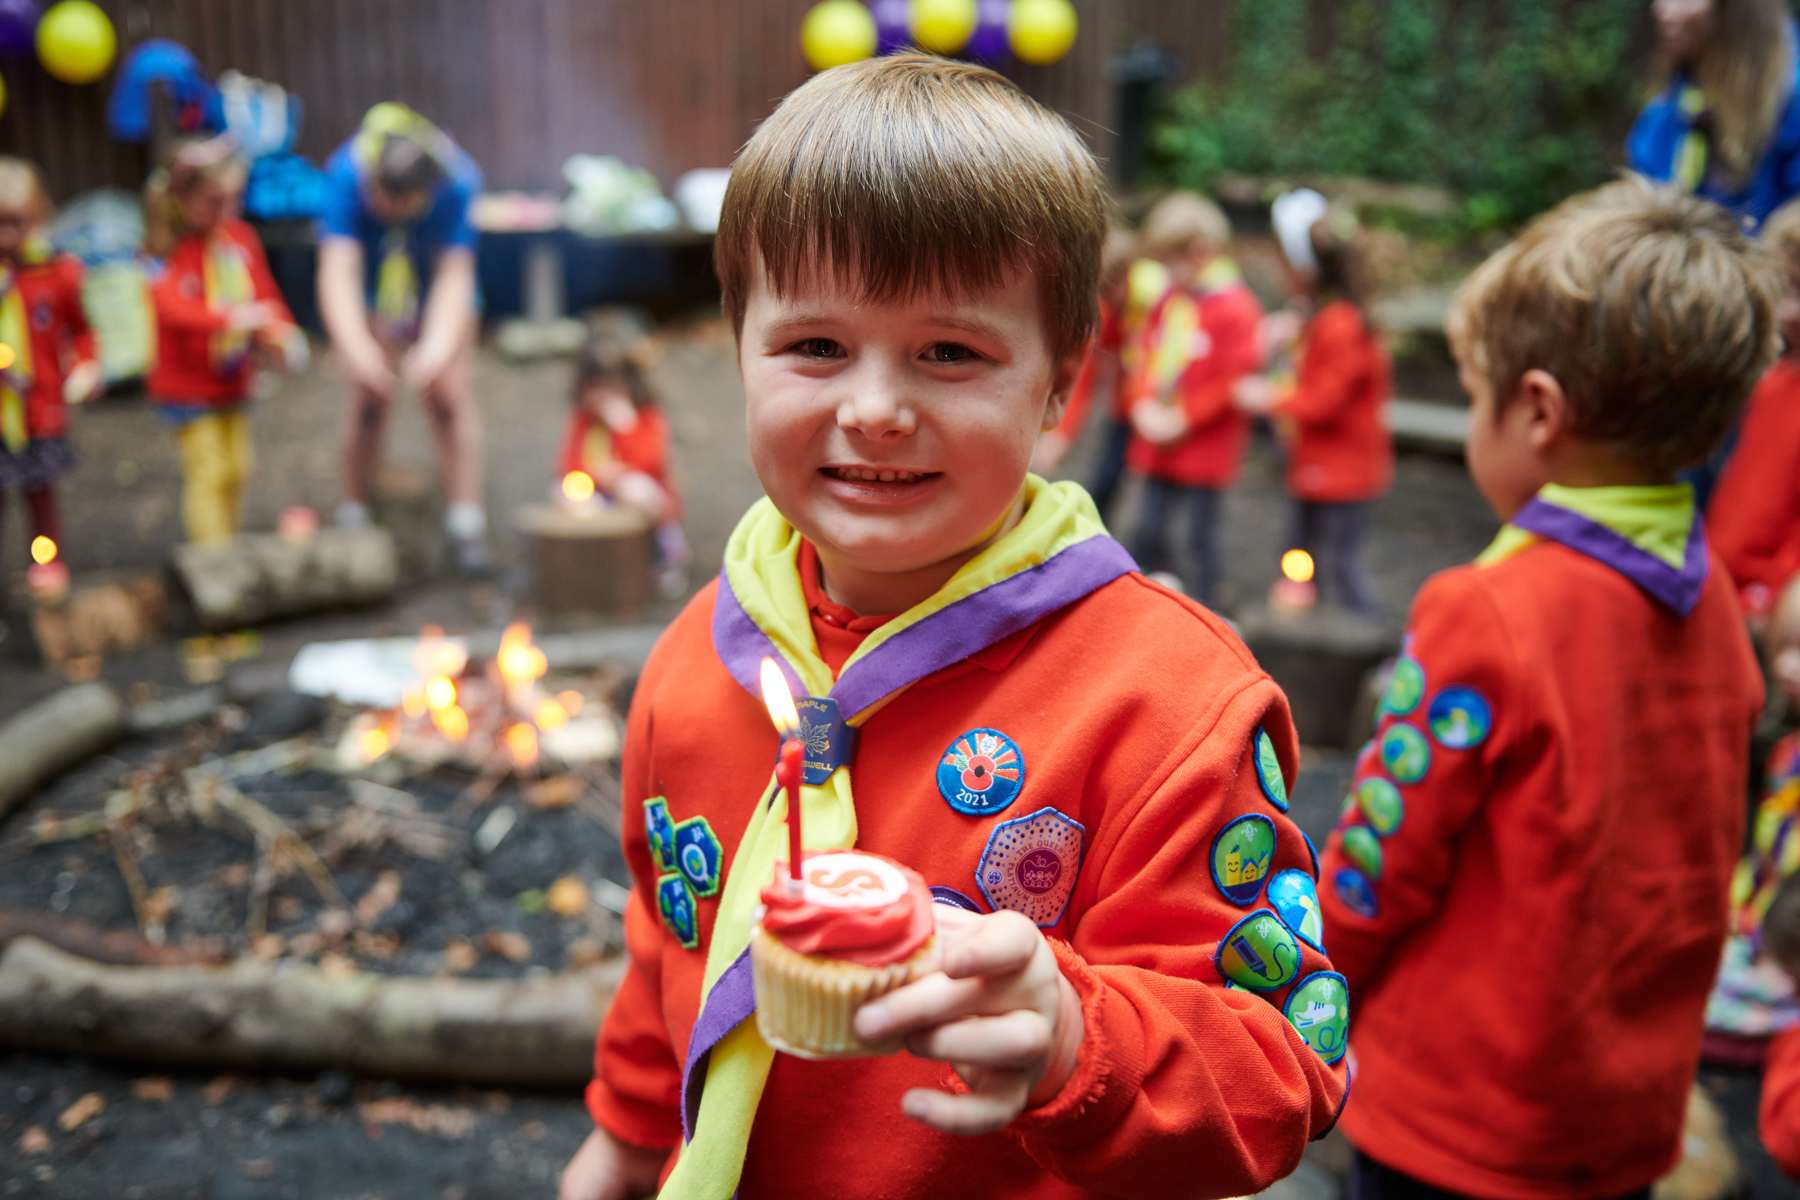 A Squirrel wearing a necker and uniform is holding a cupcake with the Squirrels logo on and a candle in, with other Squirrels and a bonfire in the background